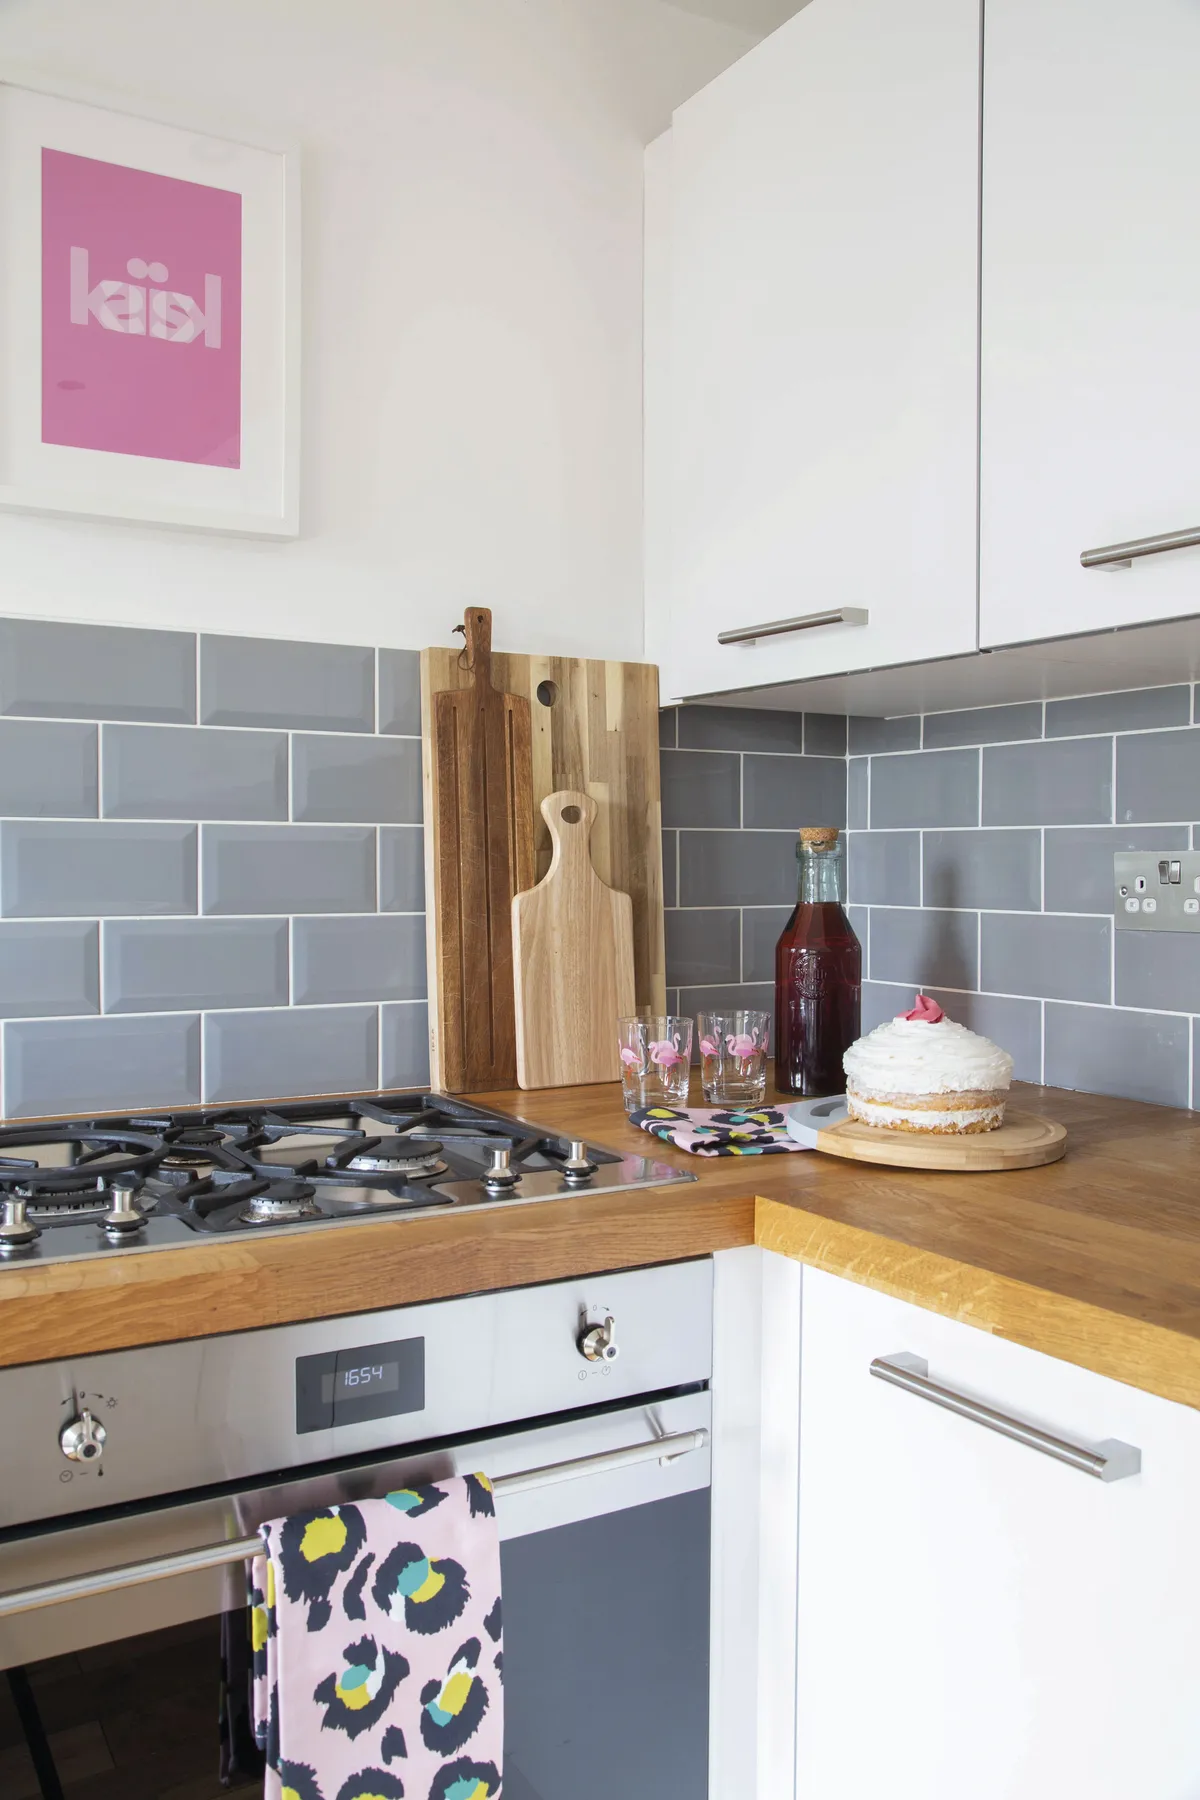 ‘I love to cook, so the Smeg oven, which I bought prior to moving in, is my favourite feature in the kitchen,’ says Lesley